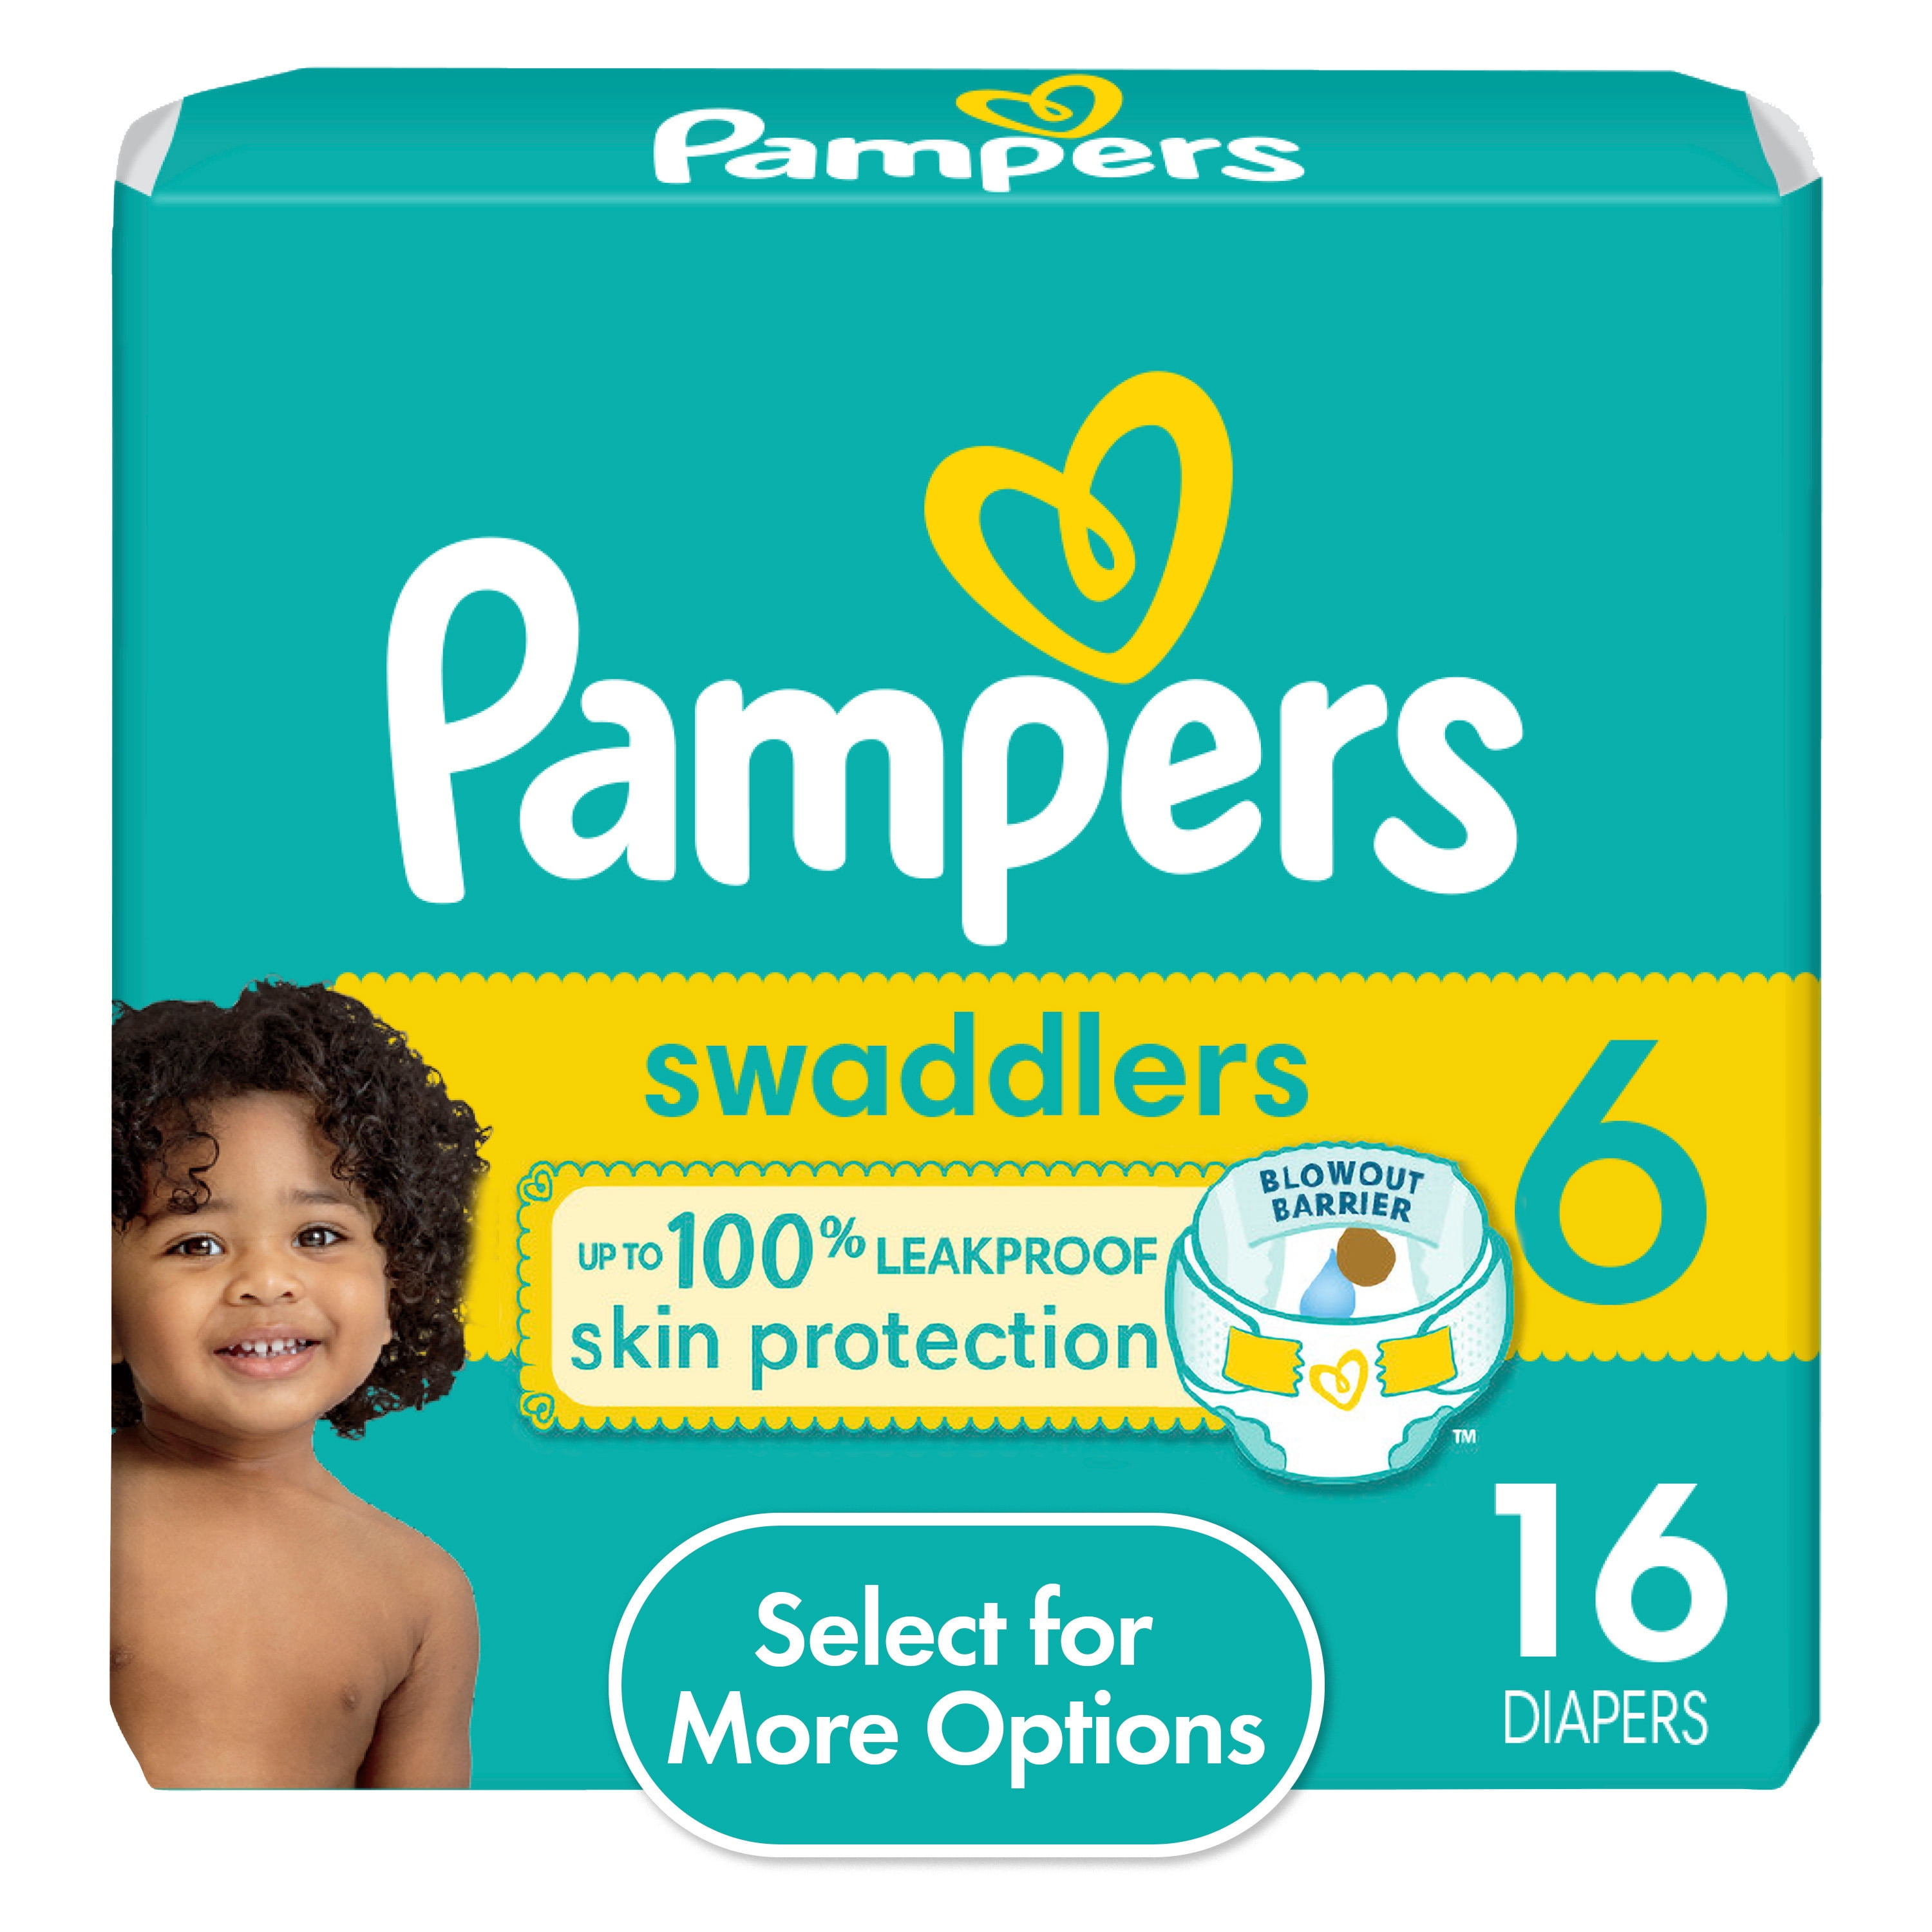  Pañales talla 6, 16 unidades – Pampers Swaddlers